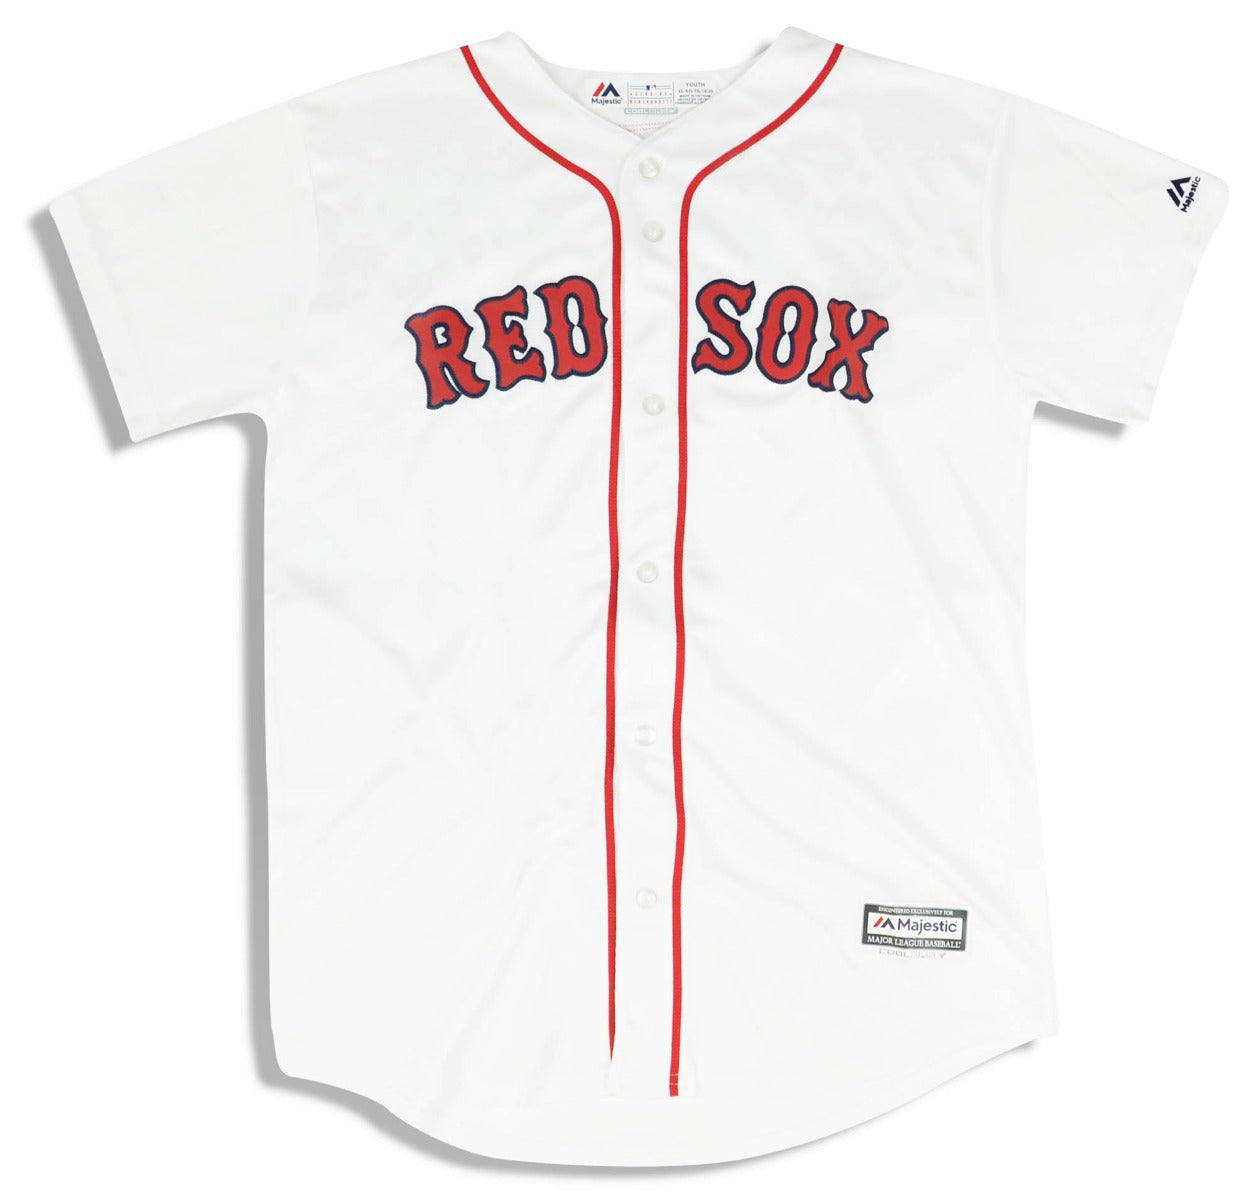 2018-19 BOSTON RED SOX MAJESTIC COOL BASE JERSEY (HOME) Y - *AS NEW*